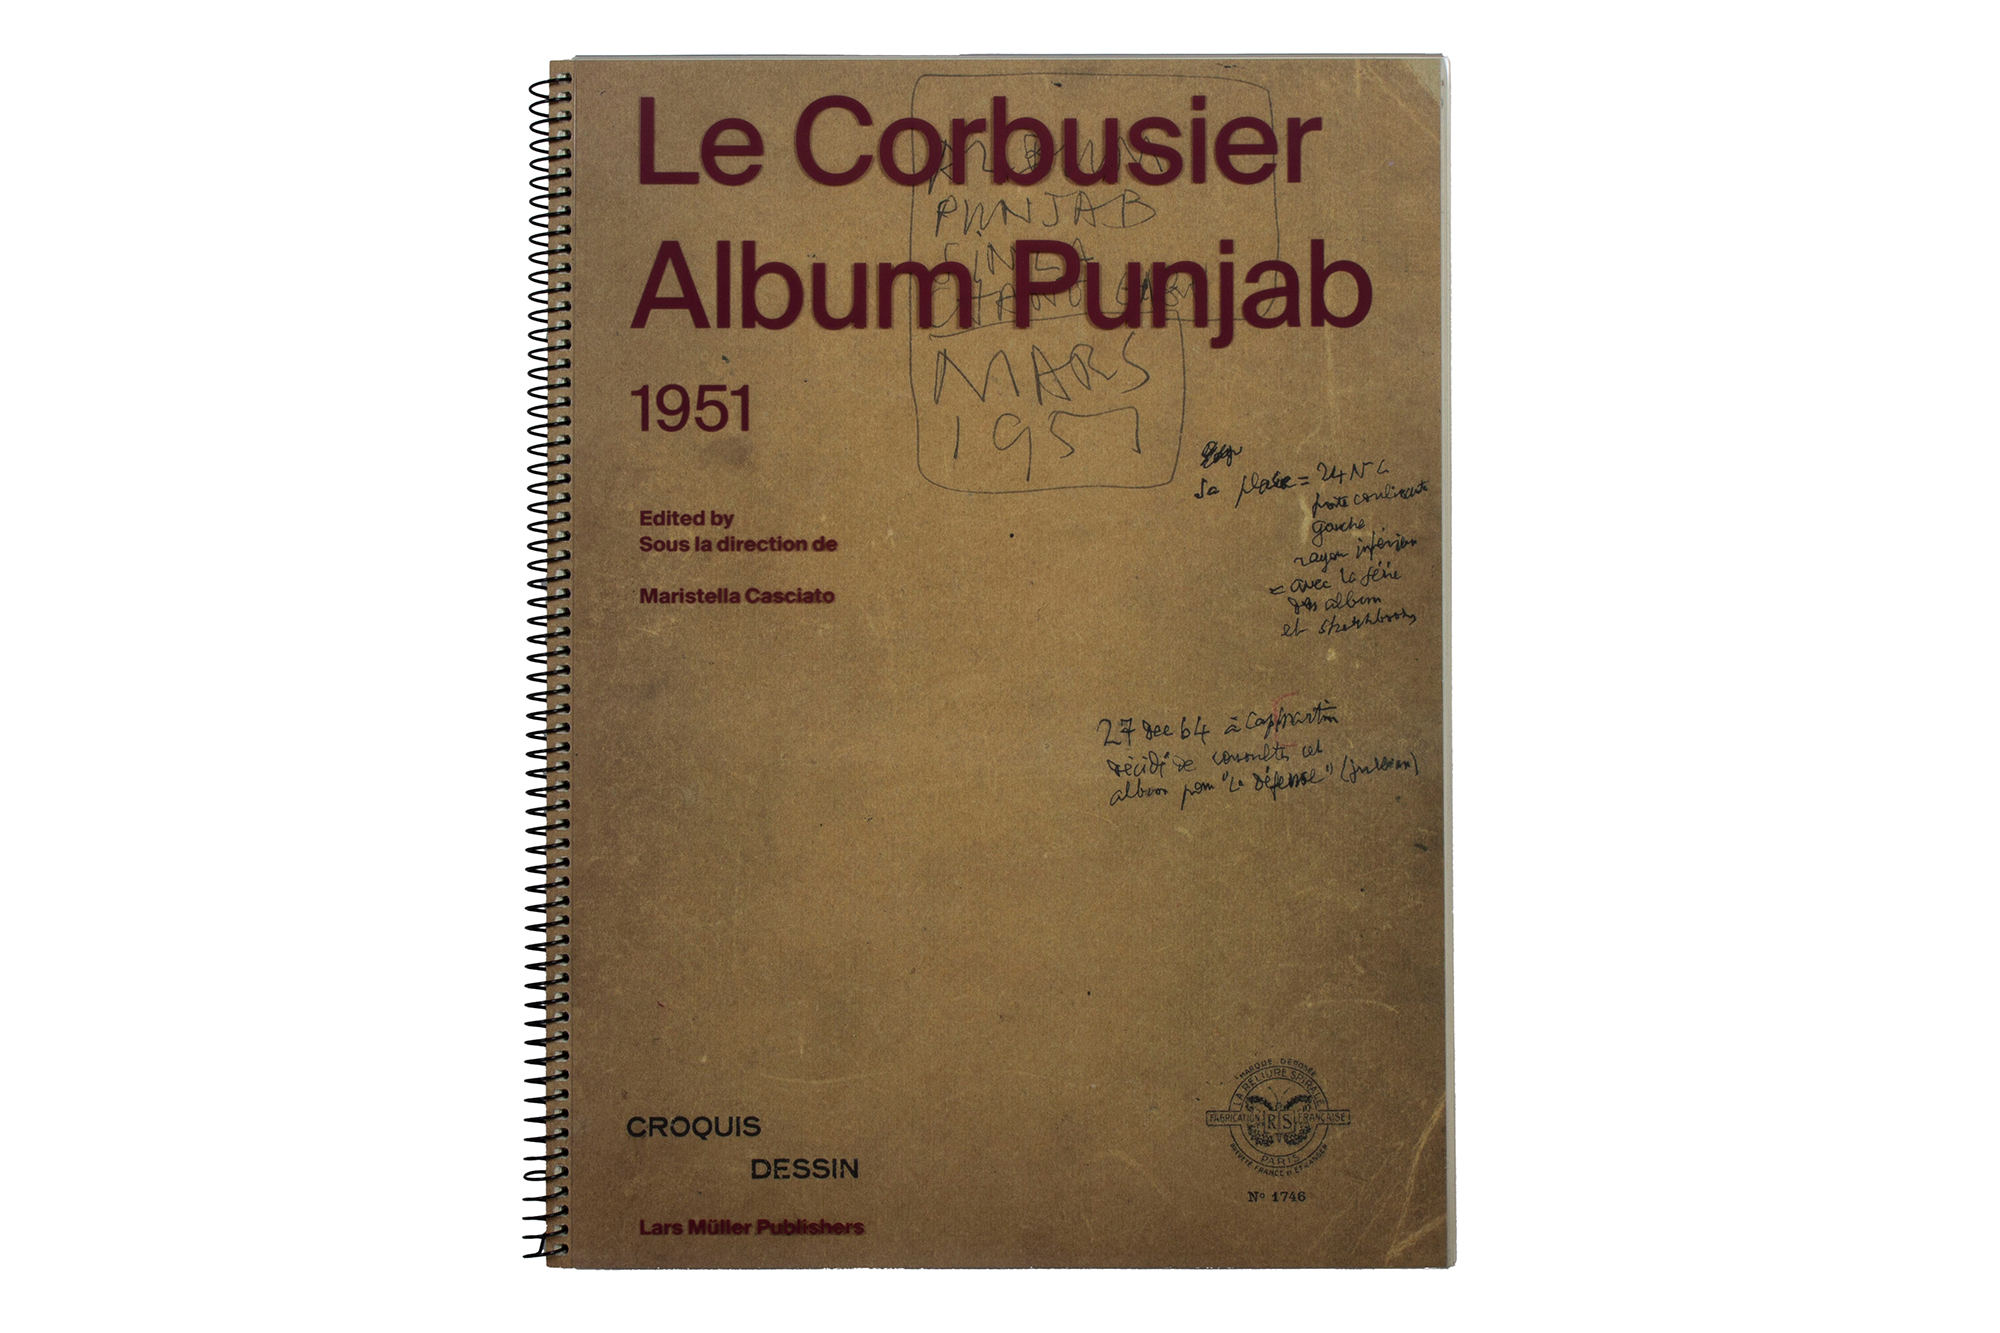 Cover of Facsimile edition of Le Corbusier's spiral-bound notebook, known as "Album Punjab"